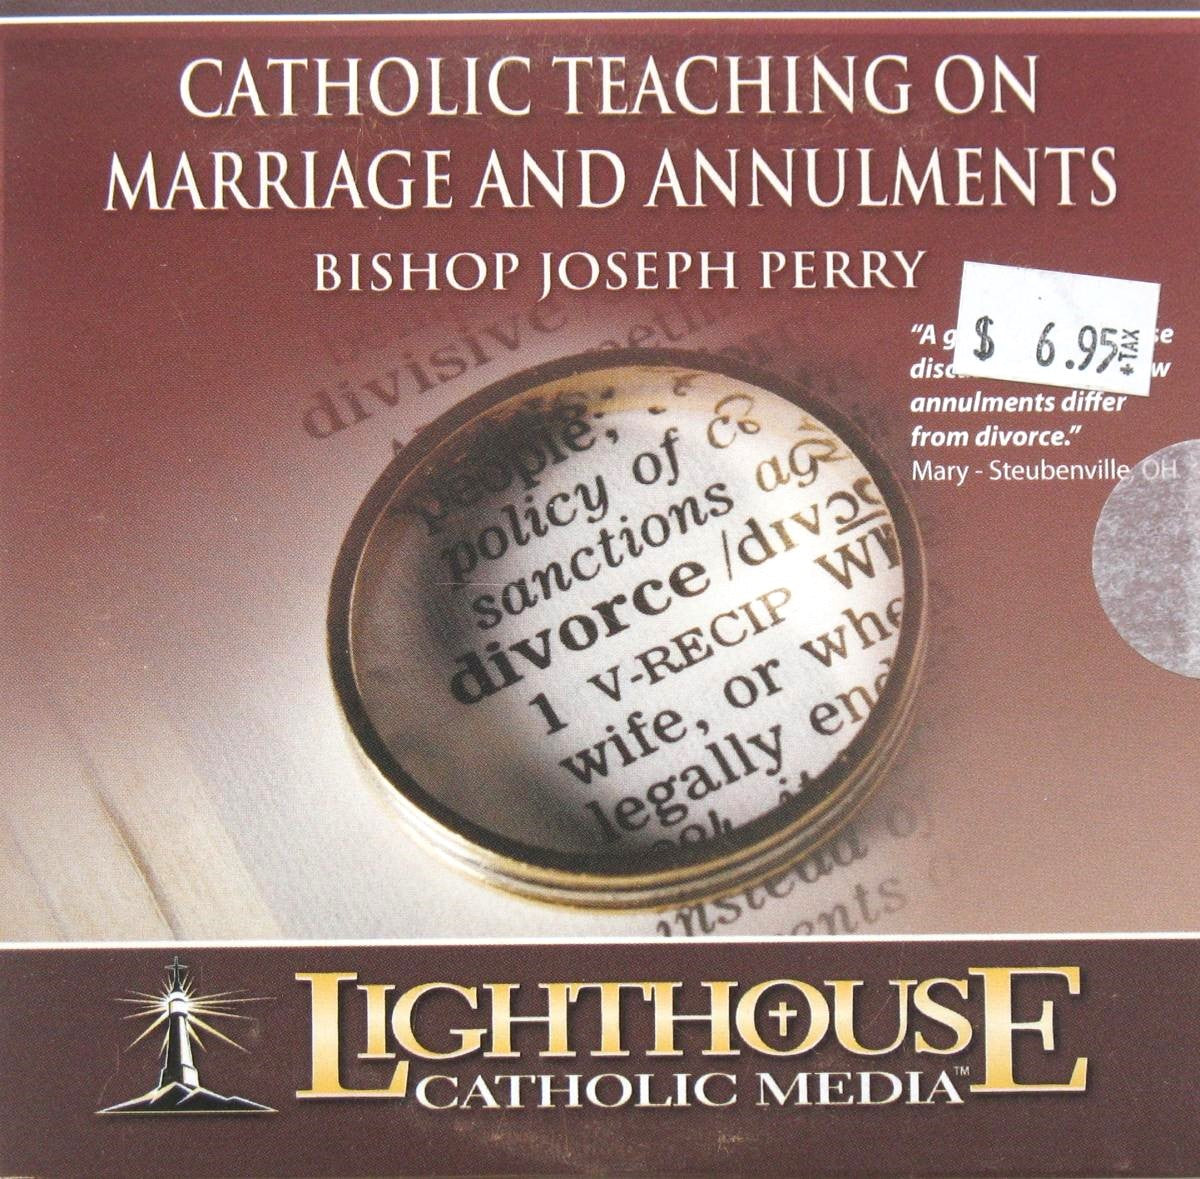 Catholic Teaching on Marriage and Annulments - CD Talk by Bishop Joseph Perry